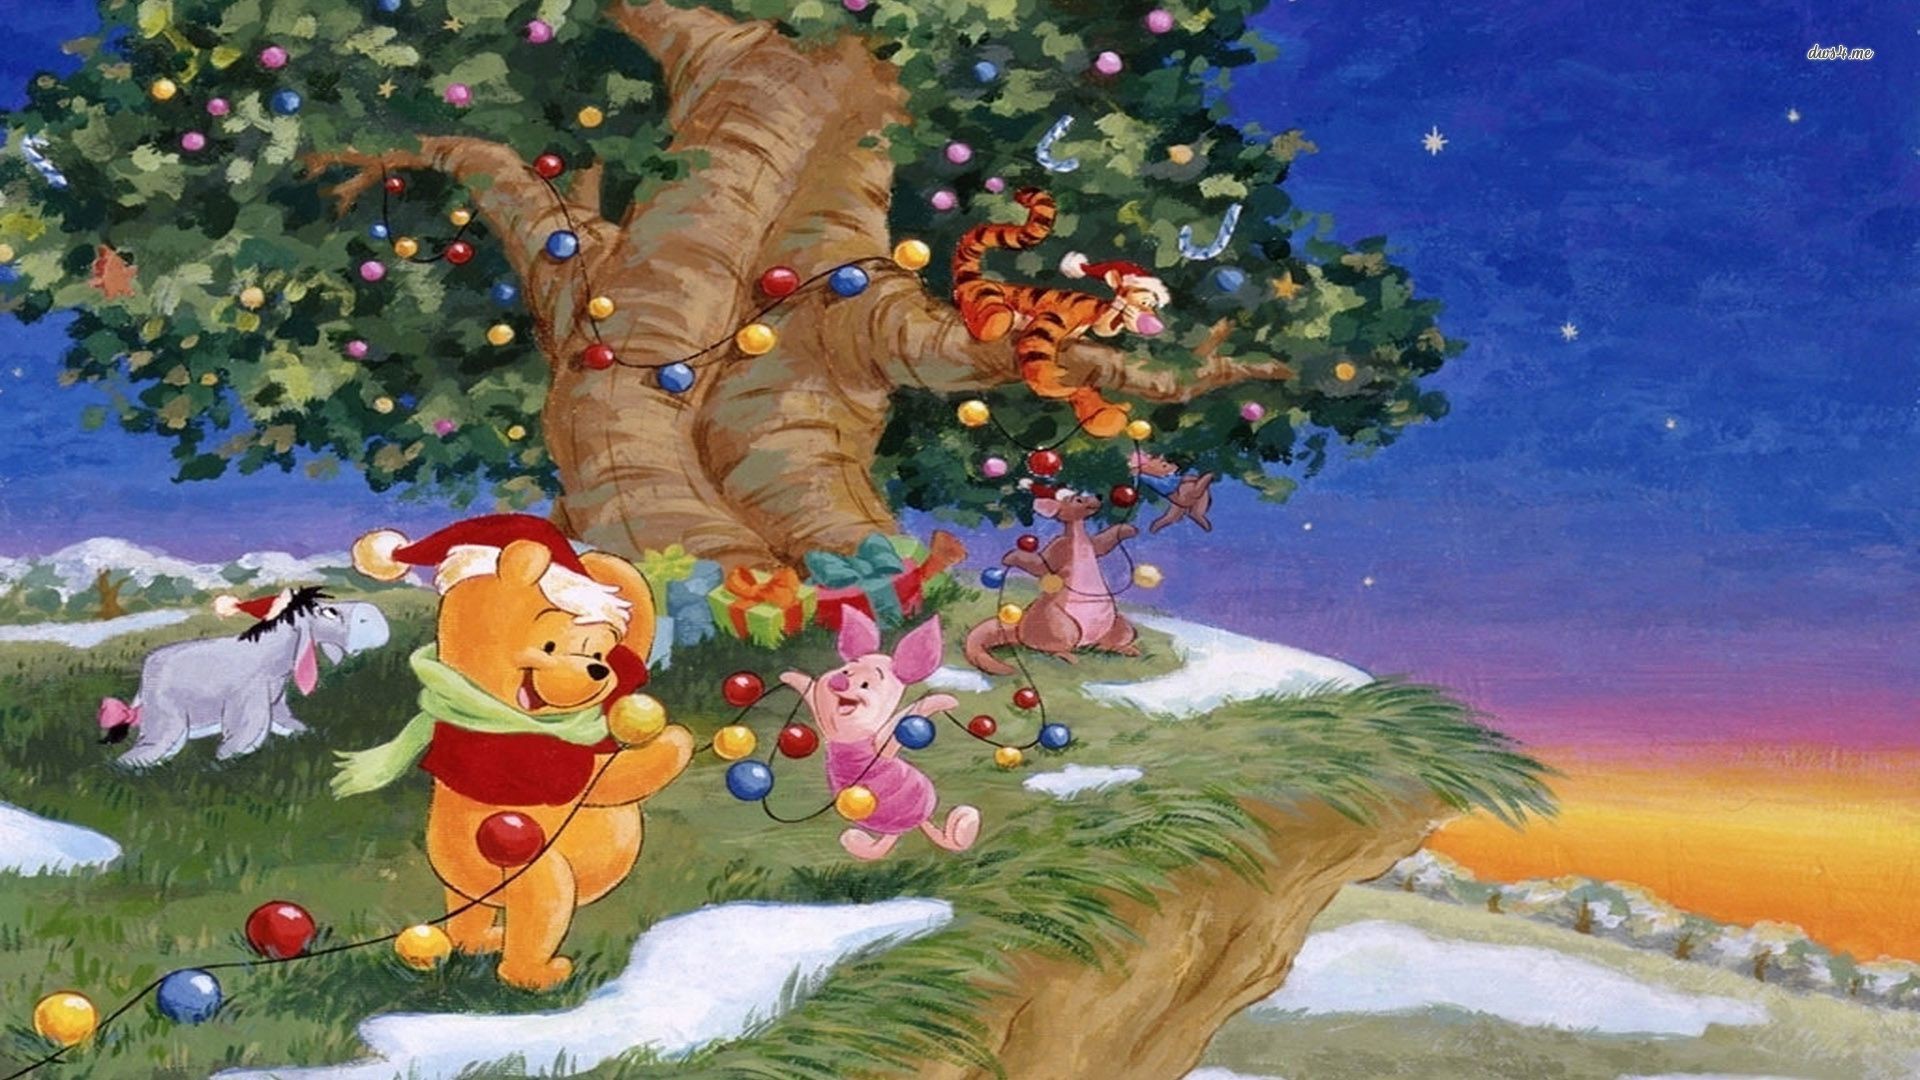 1920x1080 winnie the pooh wallpaper for android #842680